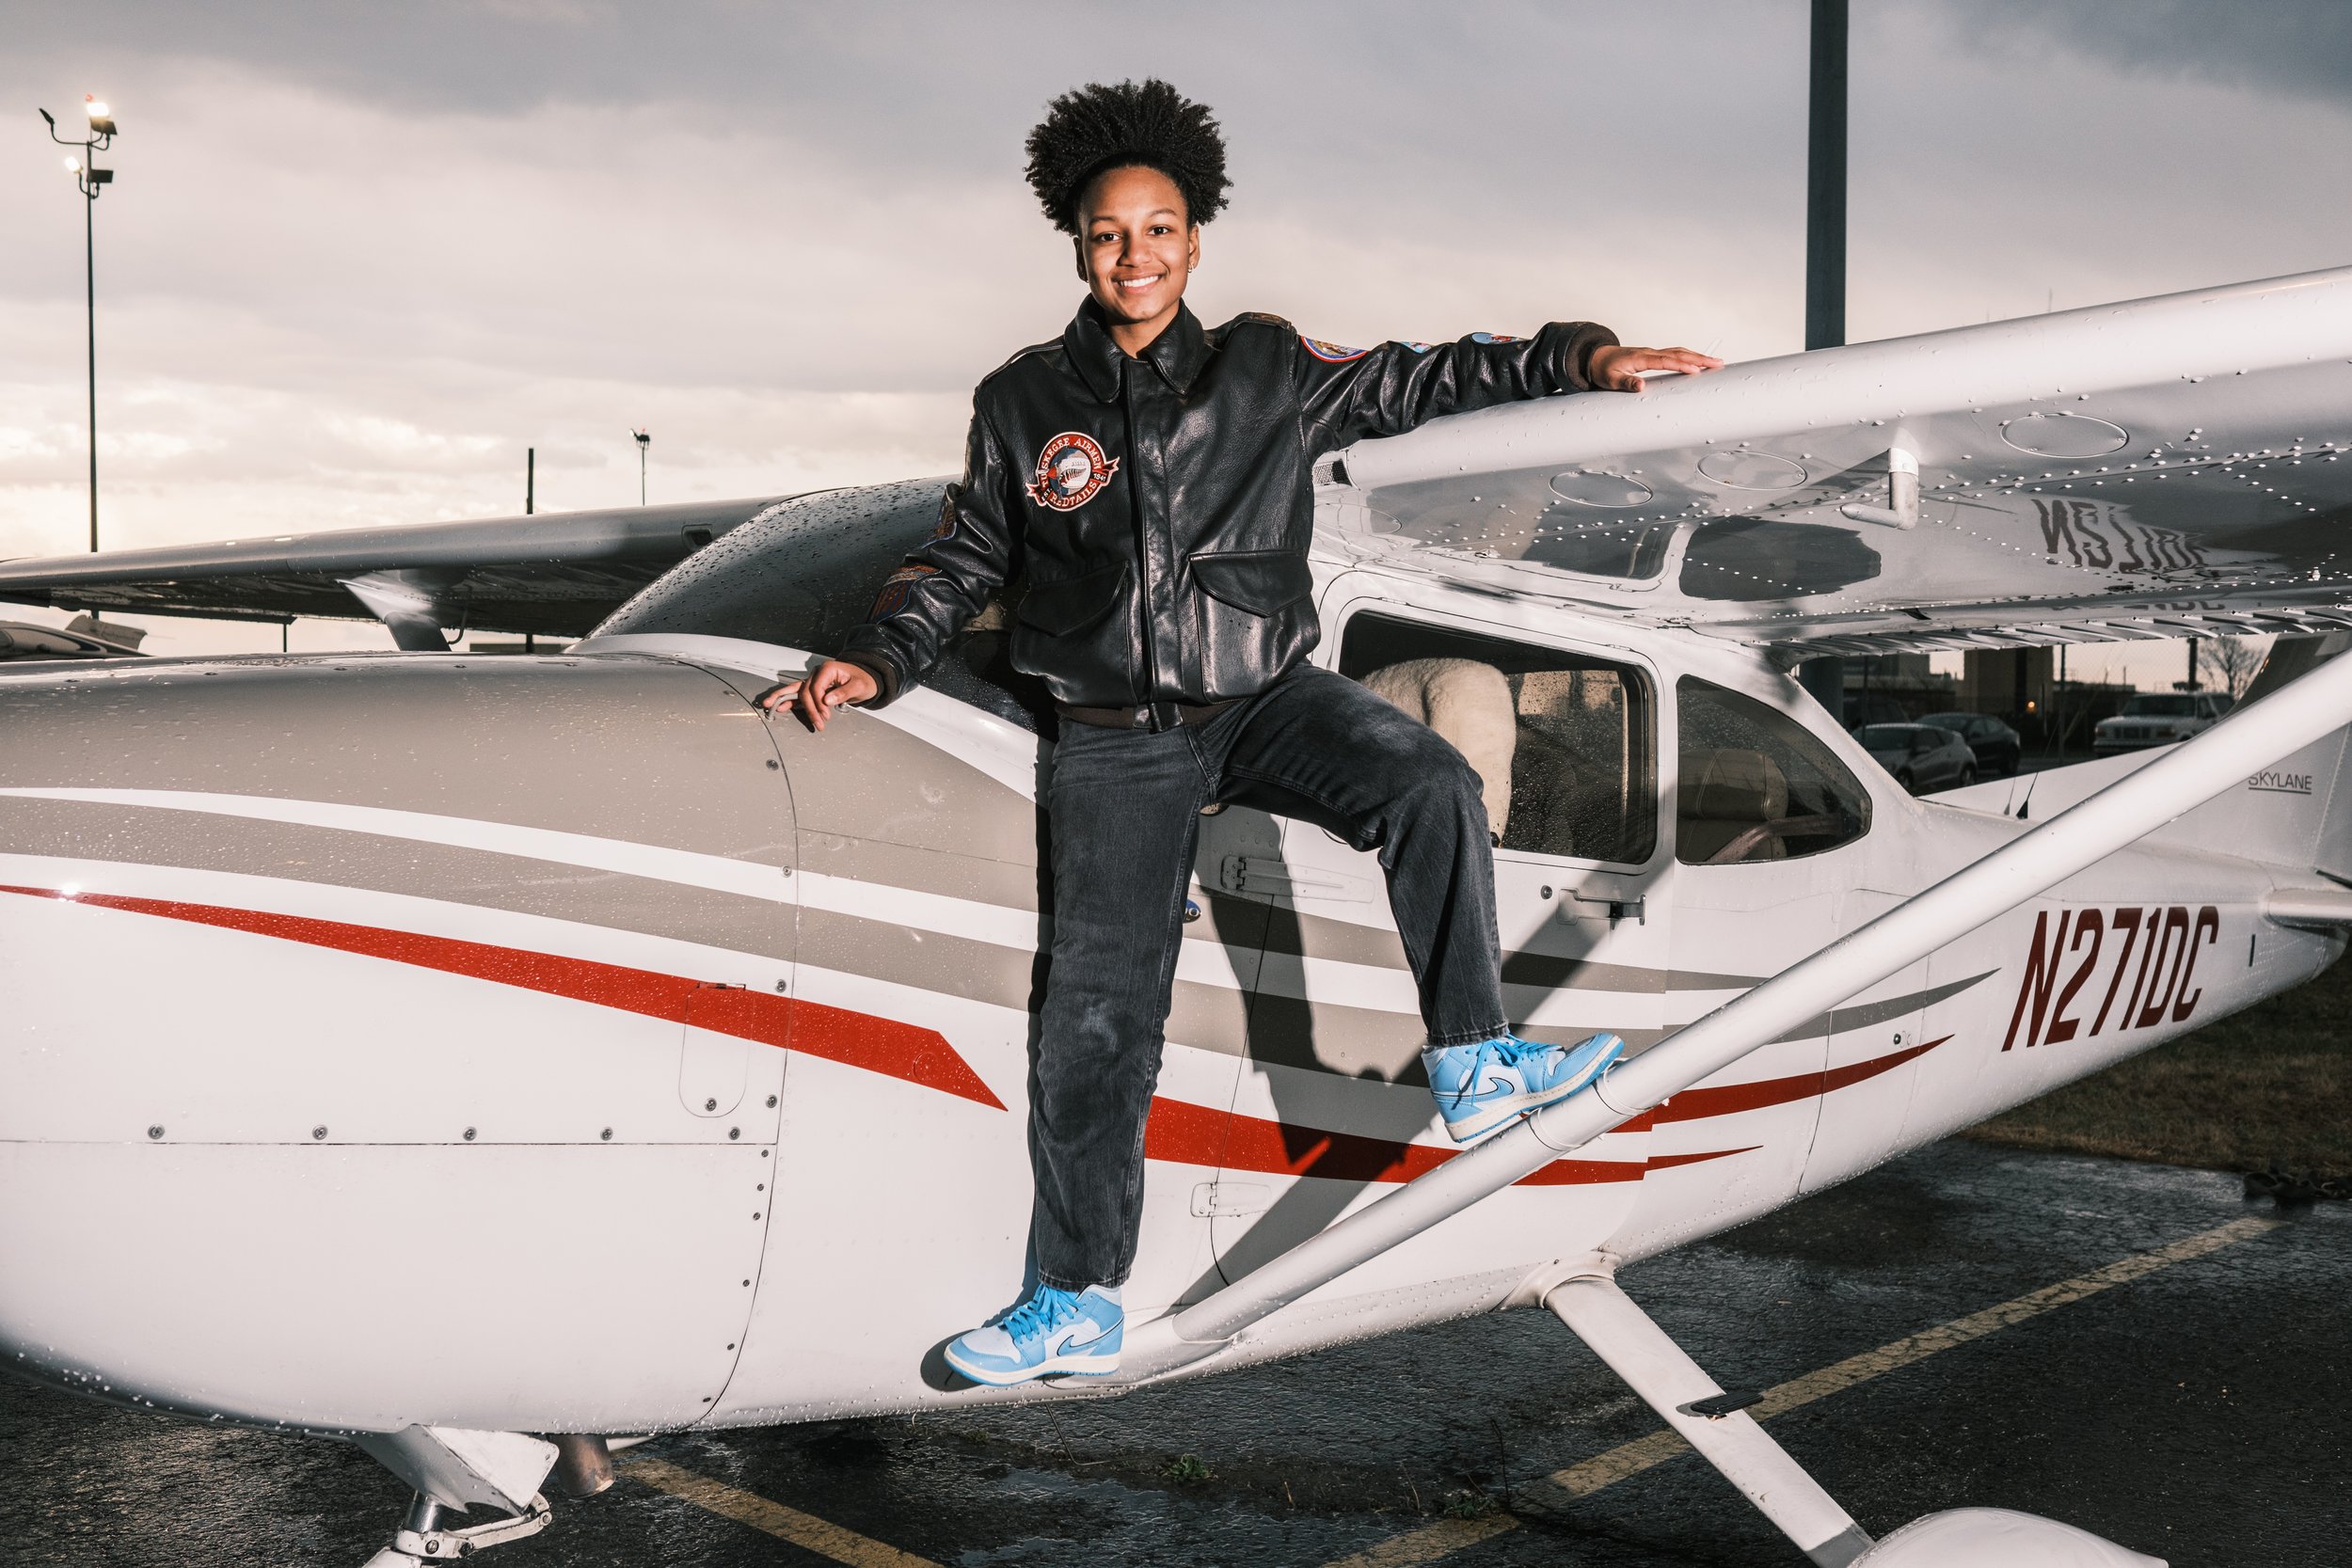  Kamora Freeland, 17, NY State’s youngest black pilot, at Republic Airport.  